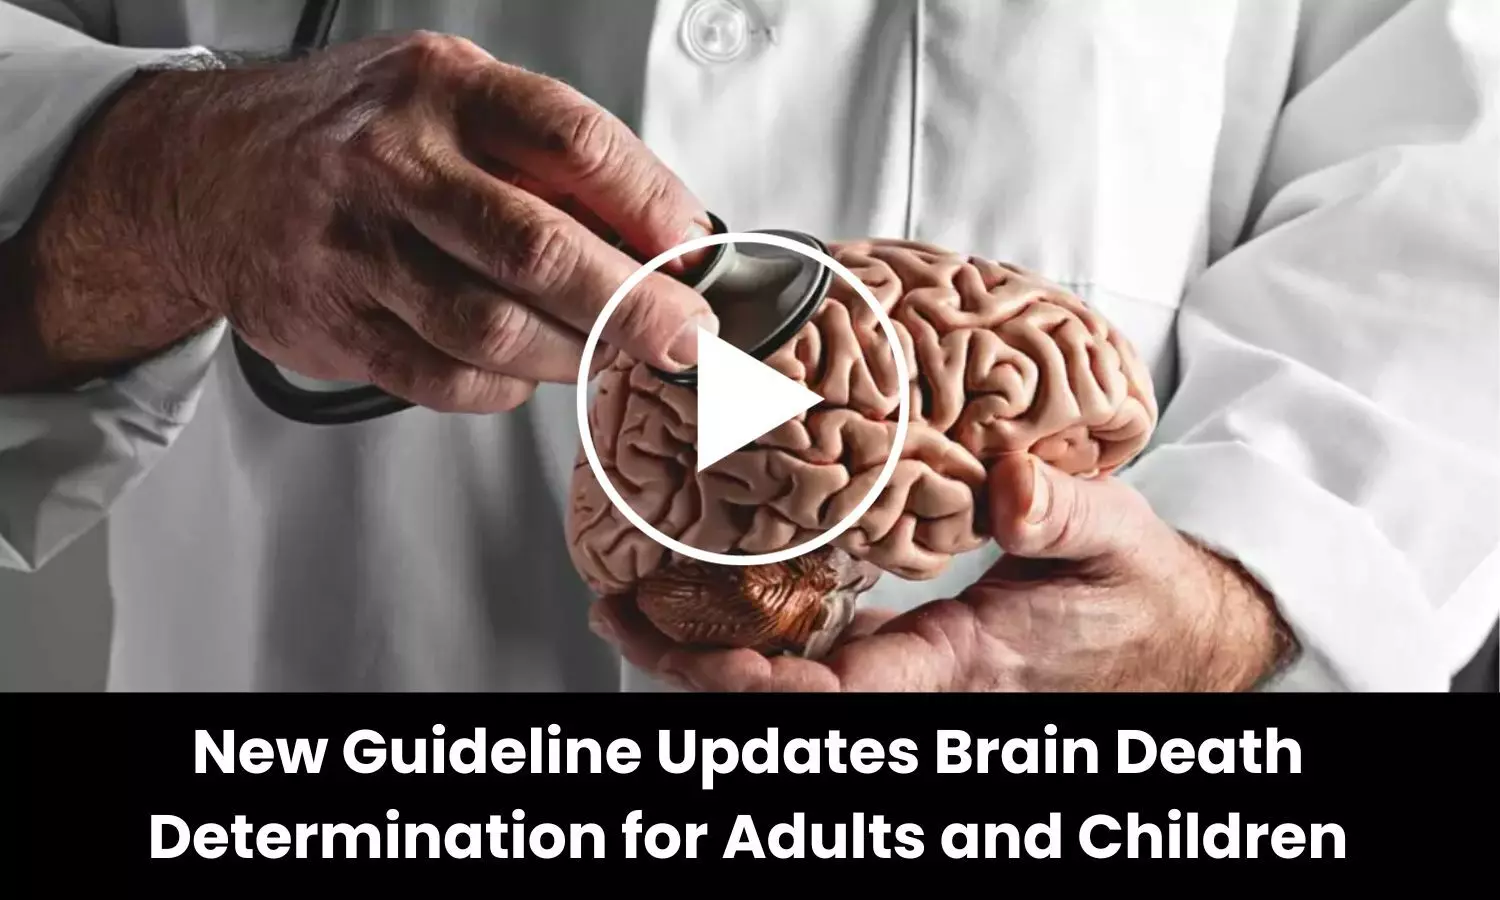 New Guideline Updates Brain Death Determination for Adults and Children